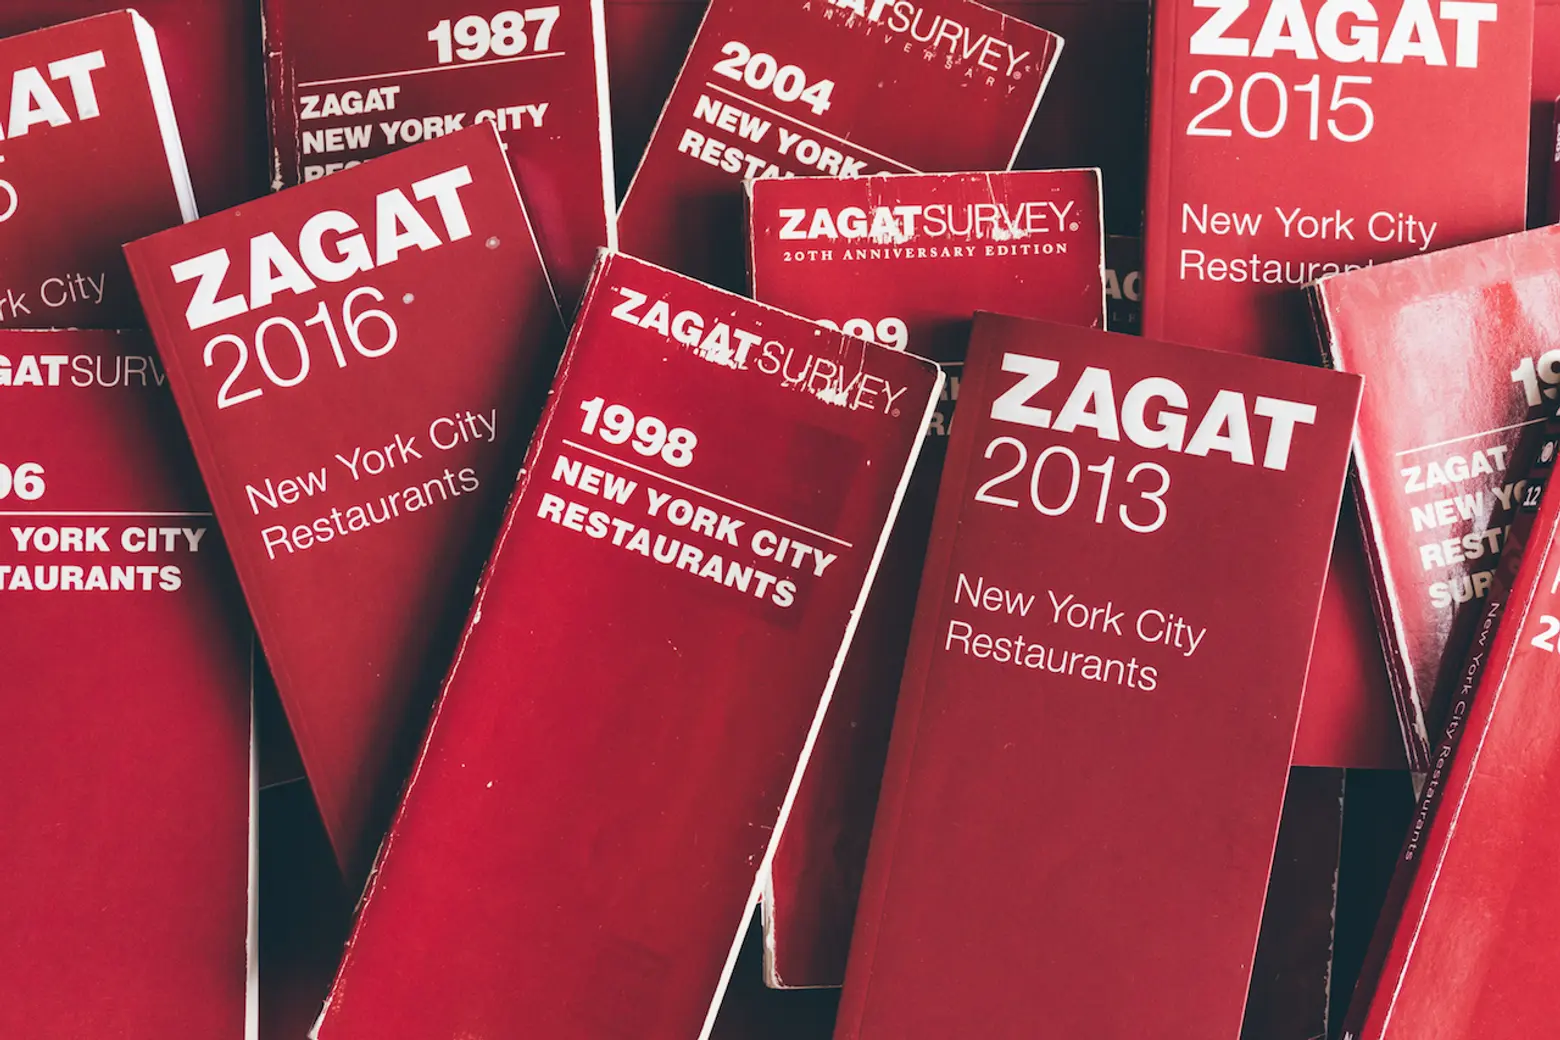 The iconic Zagat New York City restaurant guide is coming back to print this fall